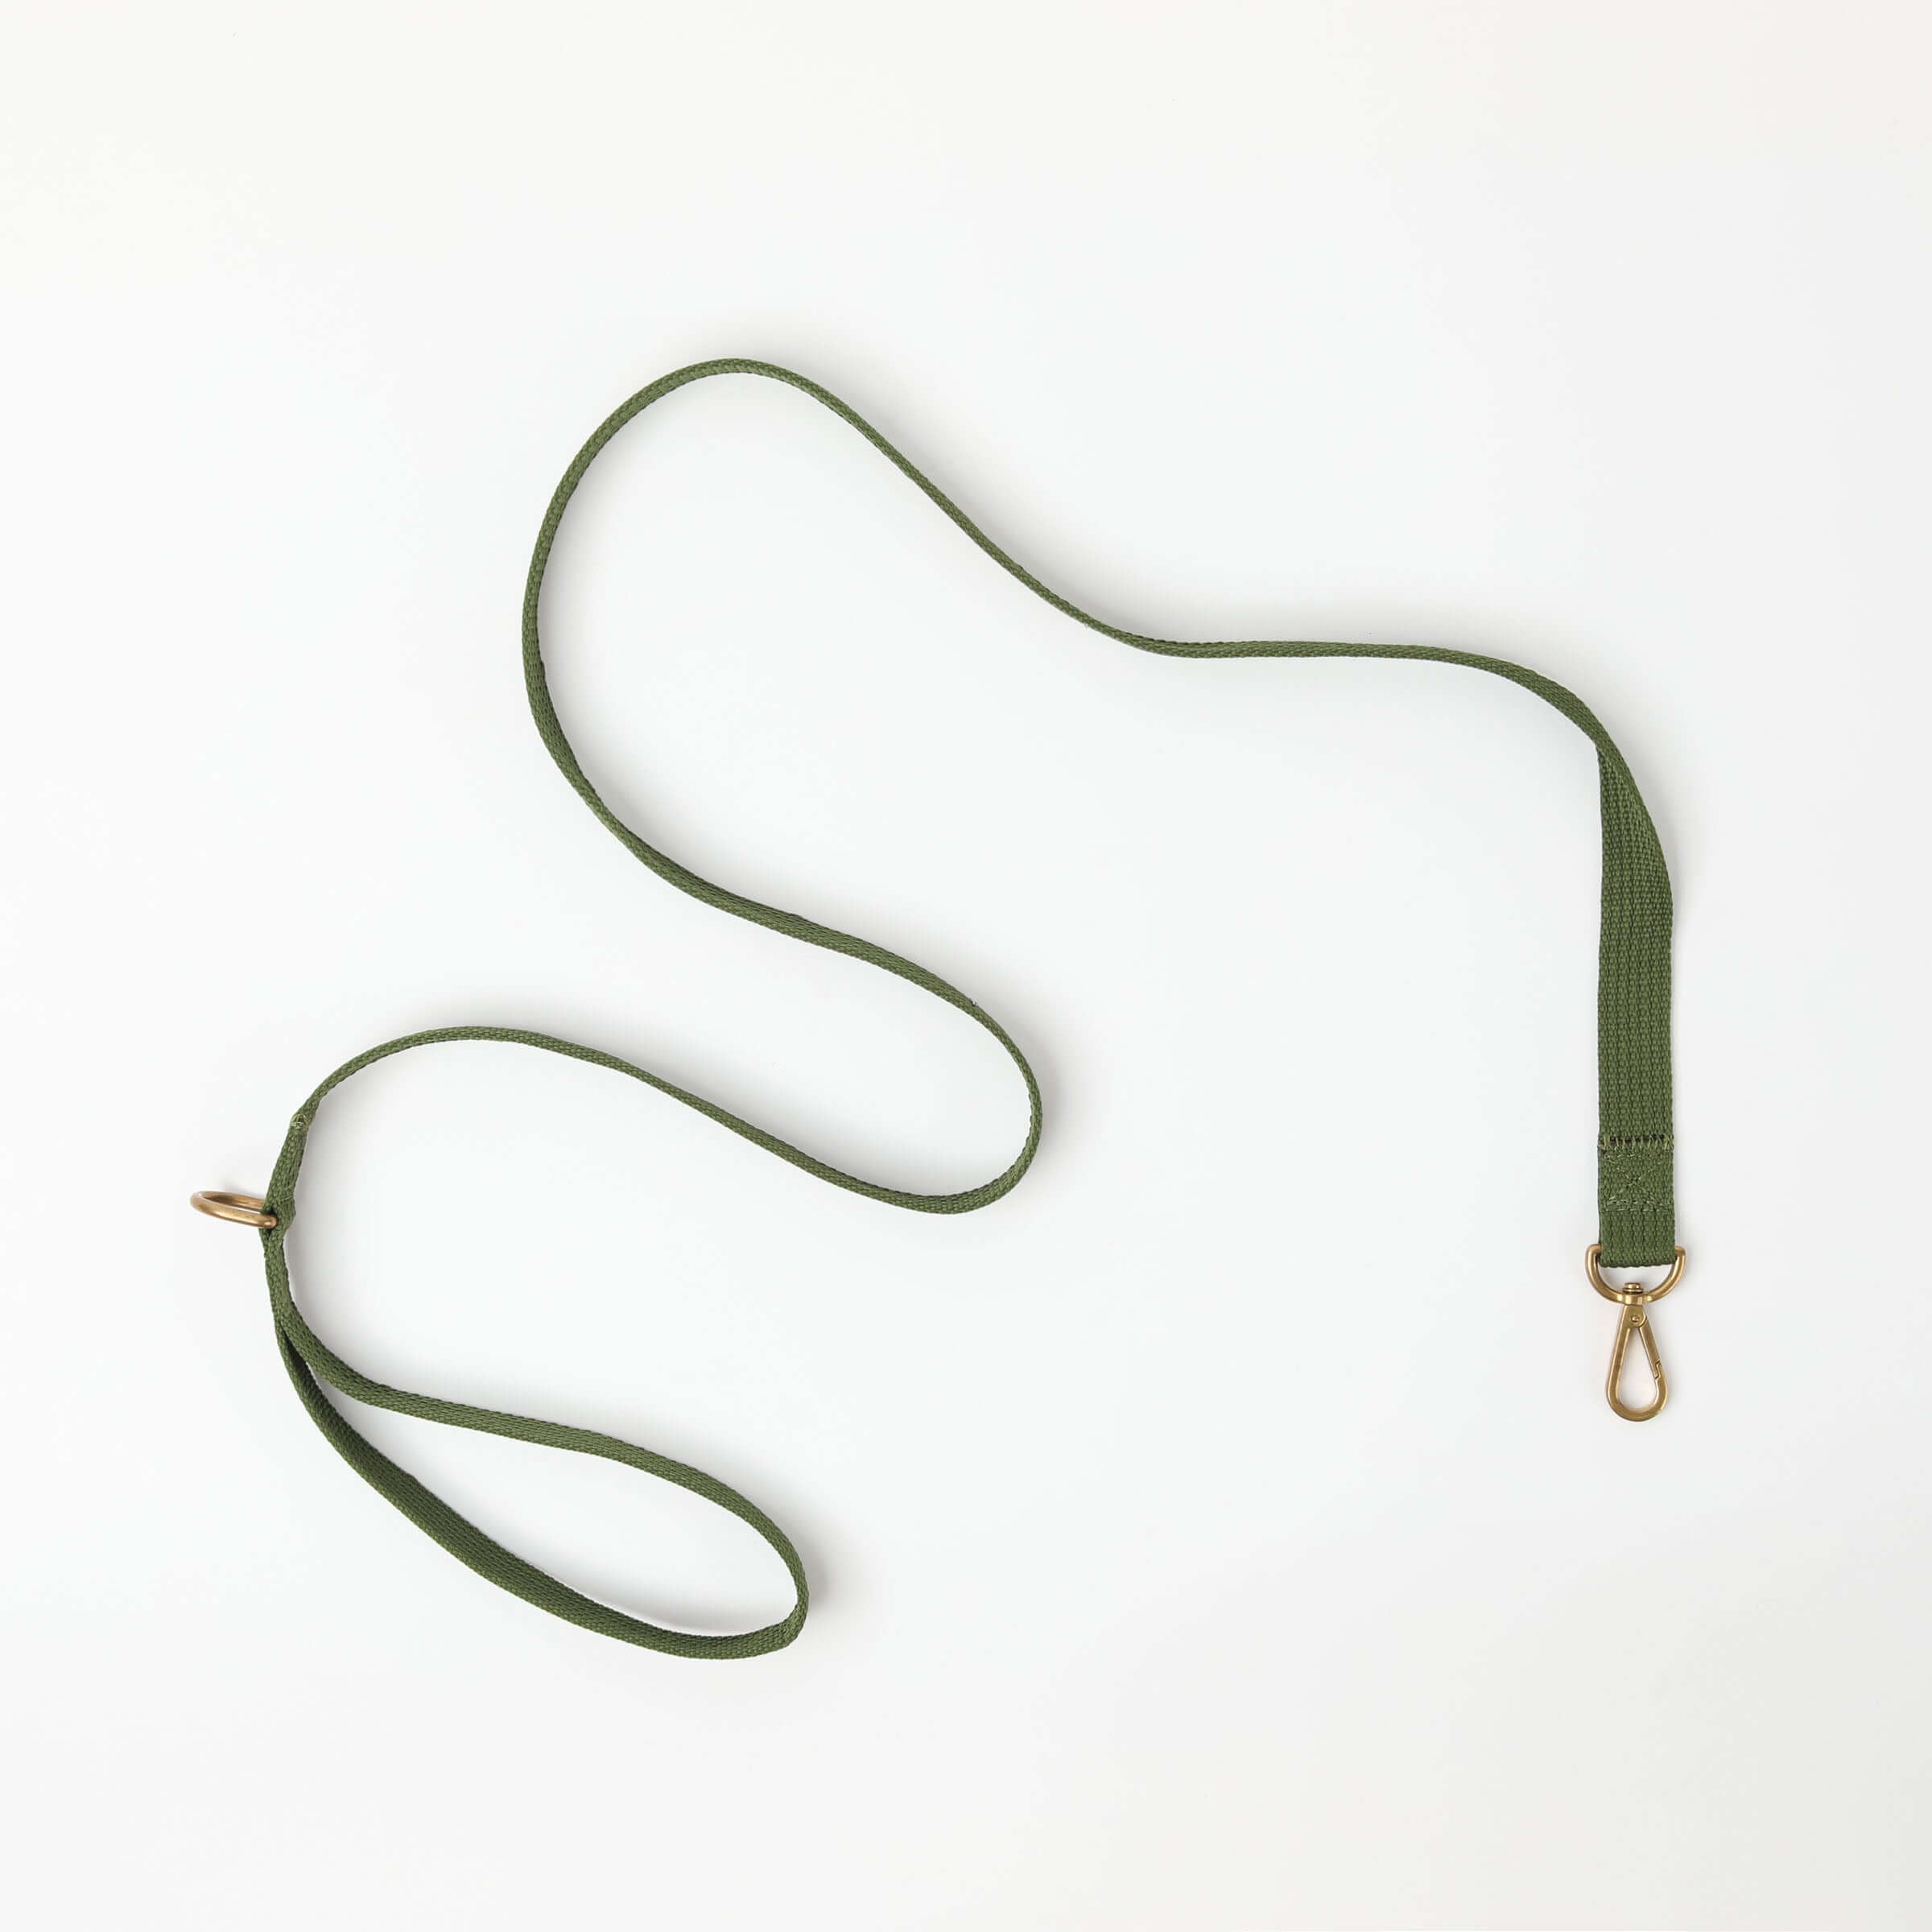 Green Waterproof dog leash made from 100% recycled ocean plastic